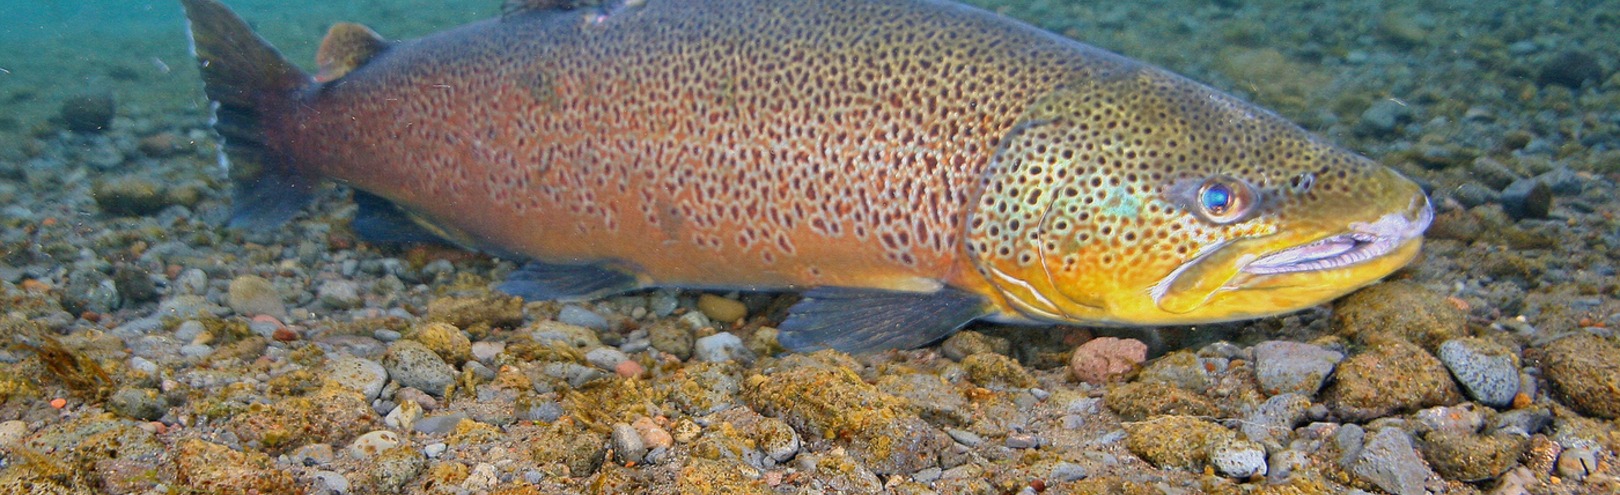 Revealing patterns of genetic diversity in the brown trout of Lake Þingvallavatn and the surrounding area - Available at University of Iceland